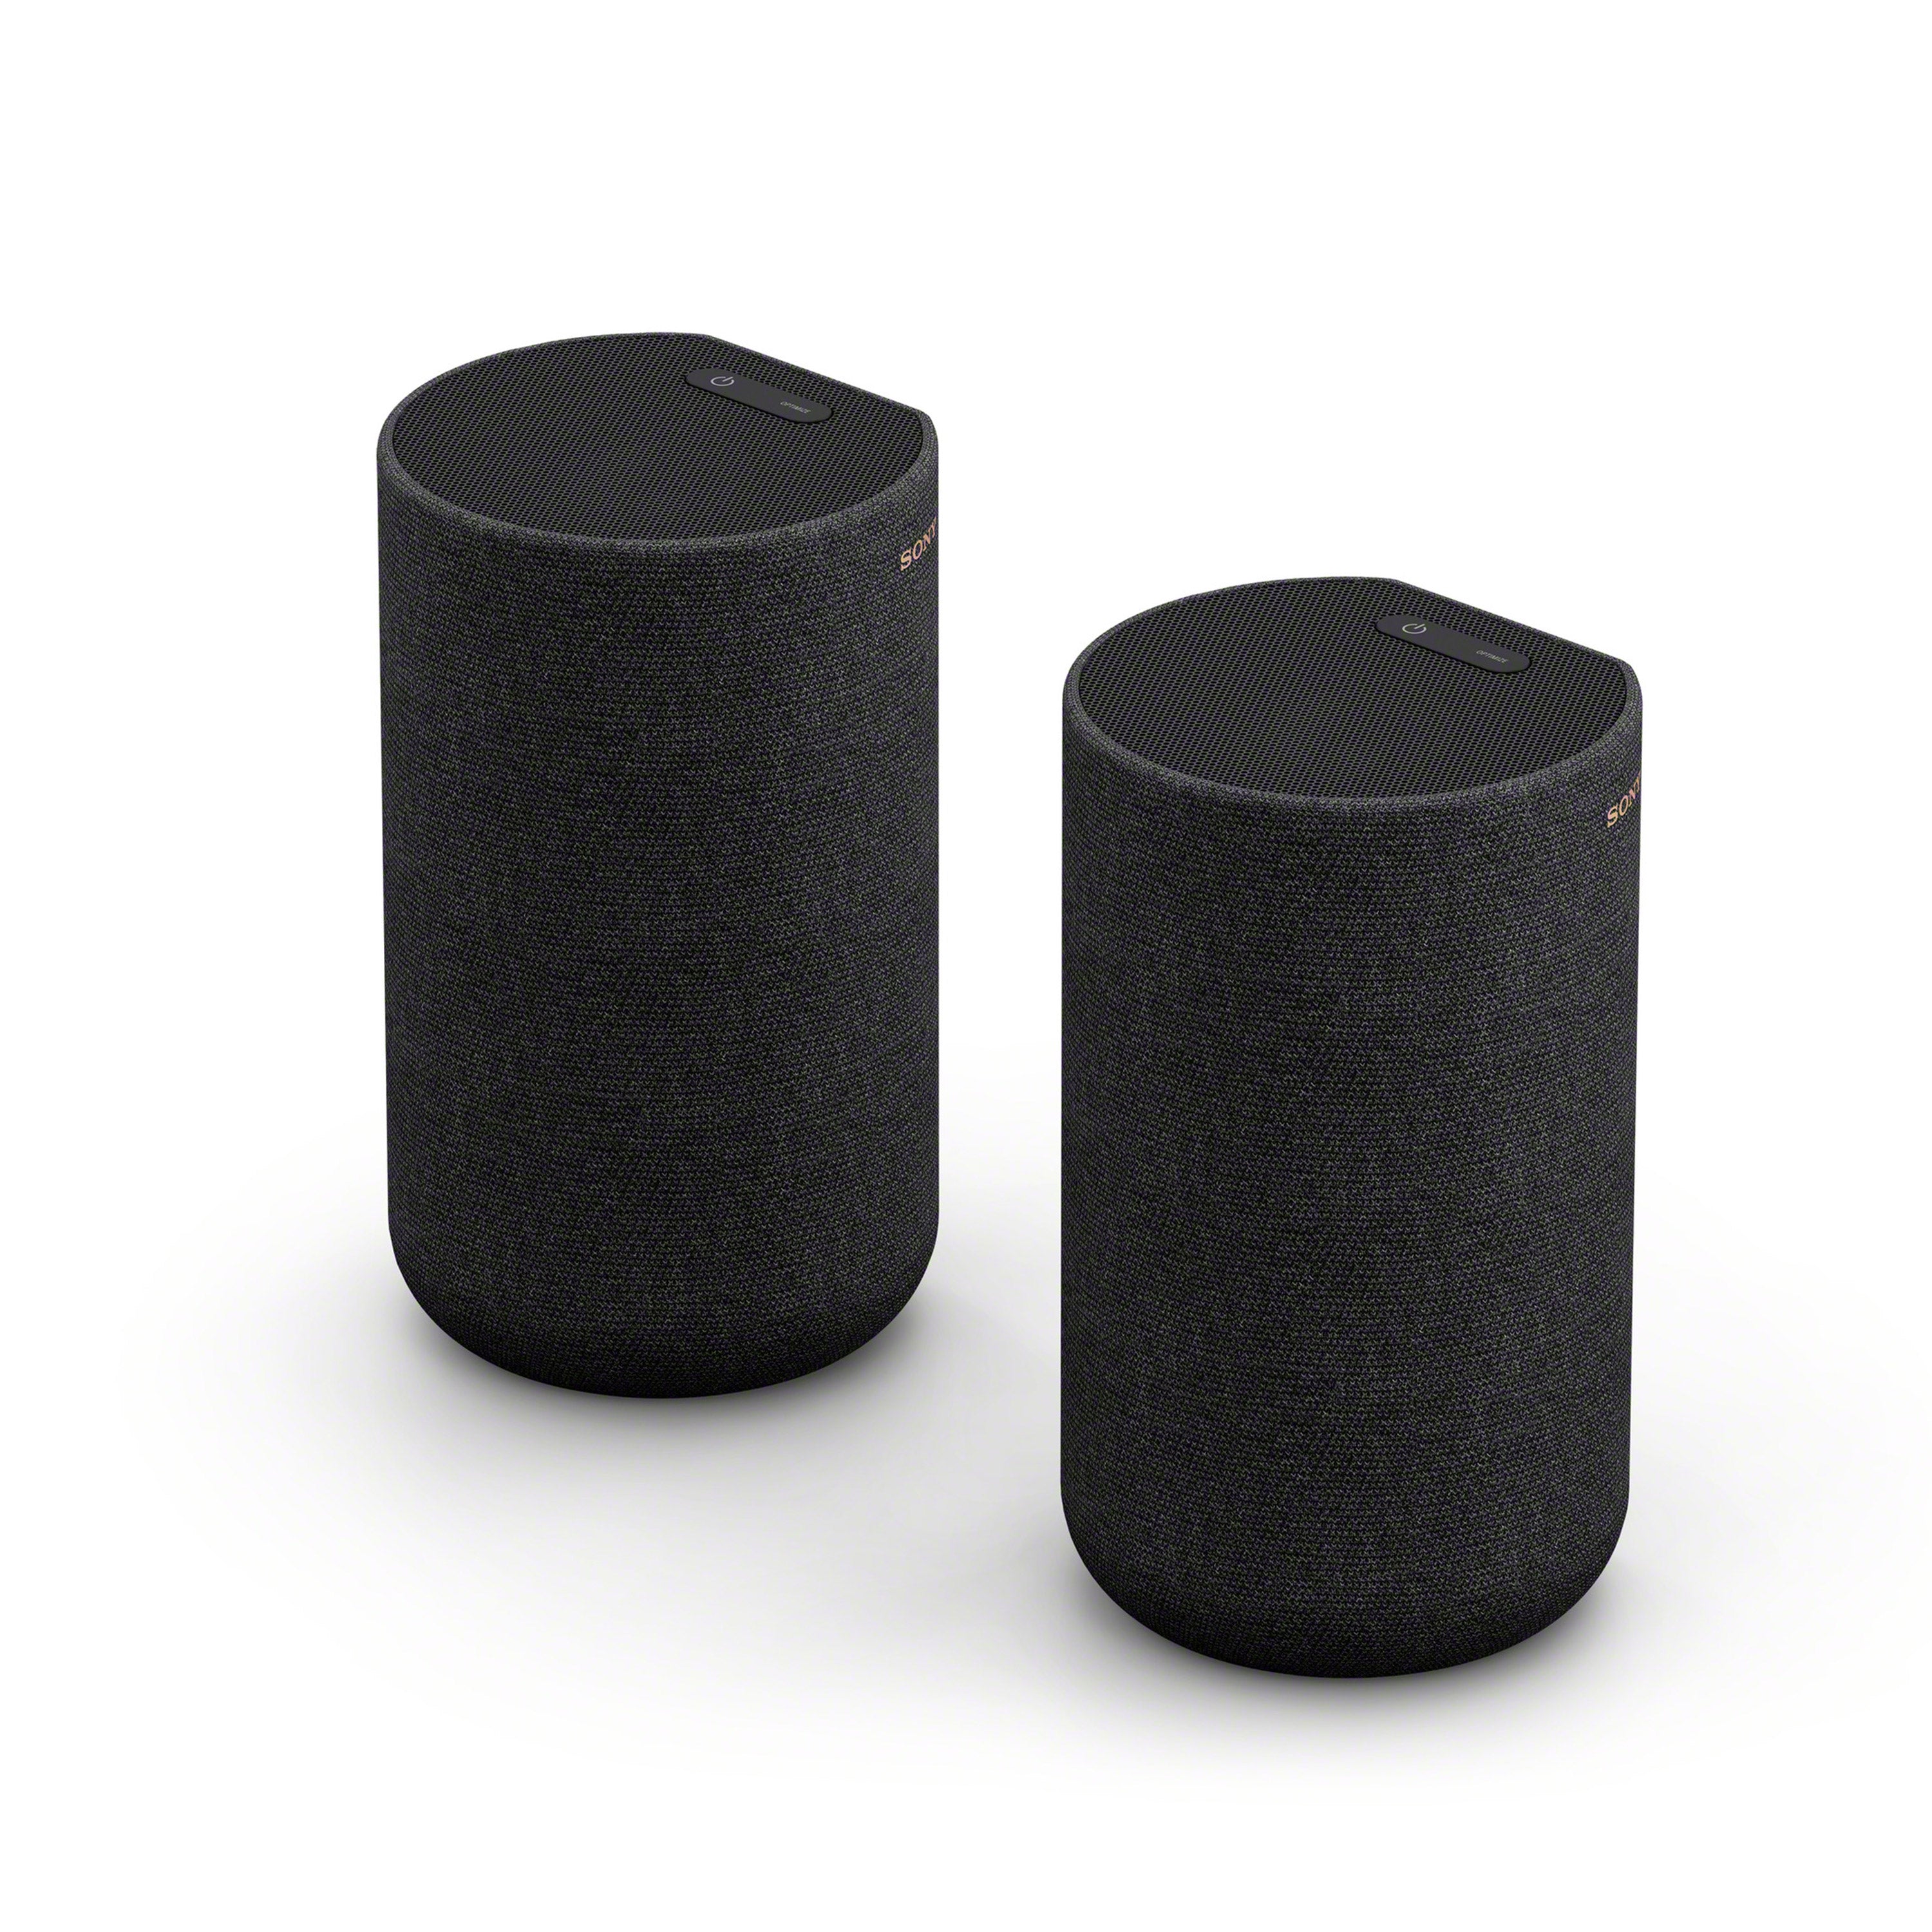 SA-RS5 Wireless Rear Speakers with Built-in Battery for HT-A7000/HT-A500